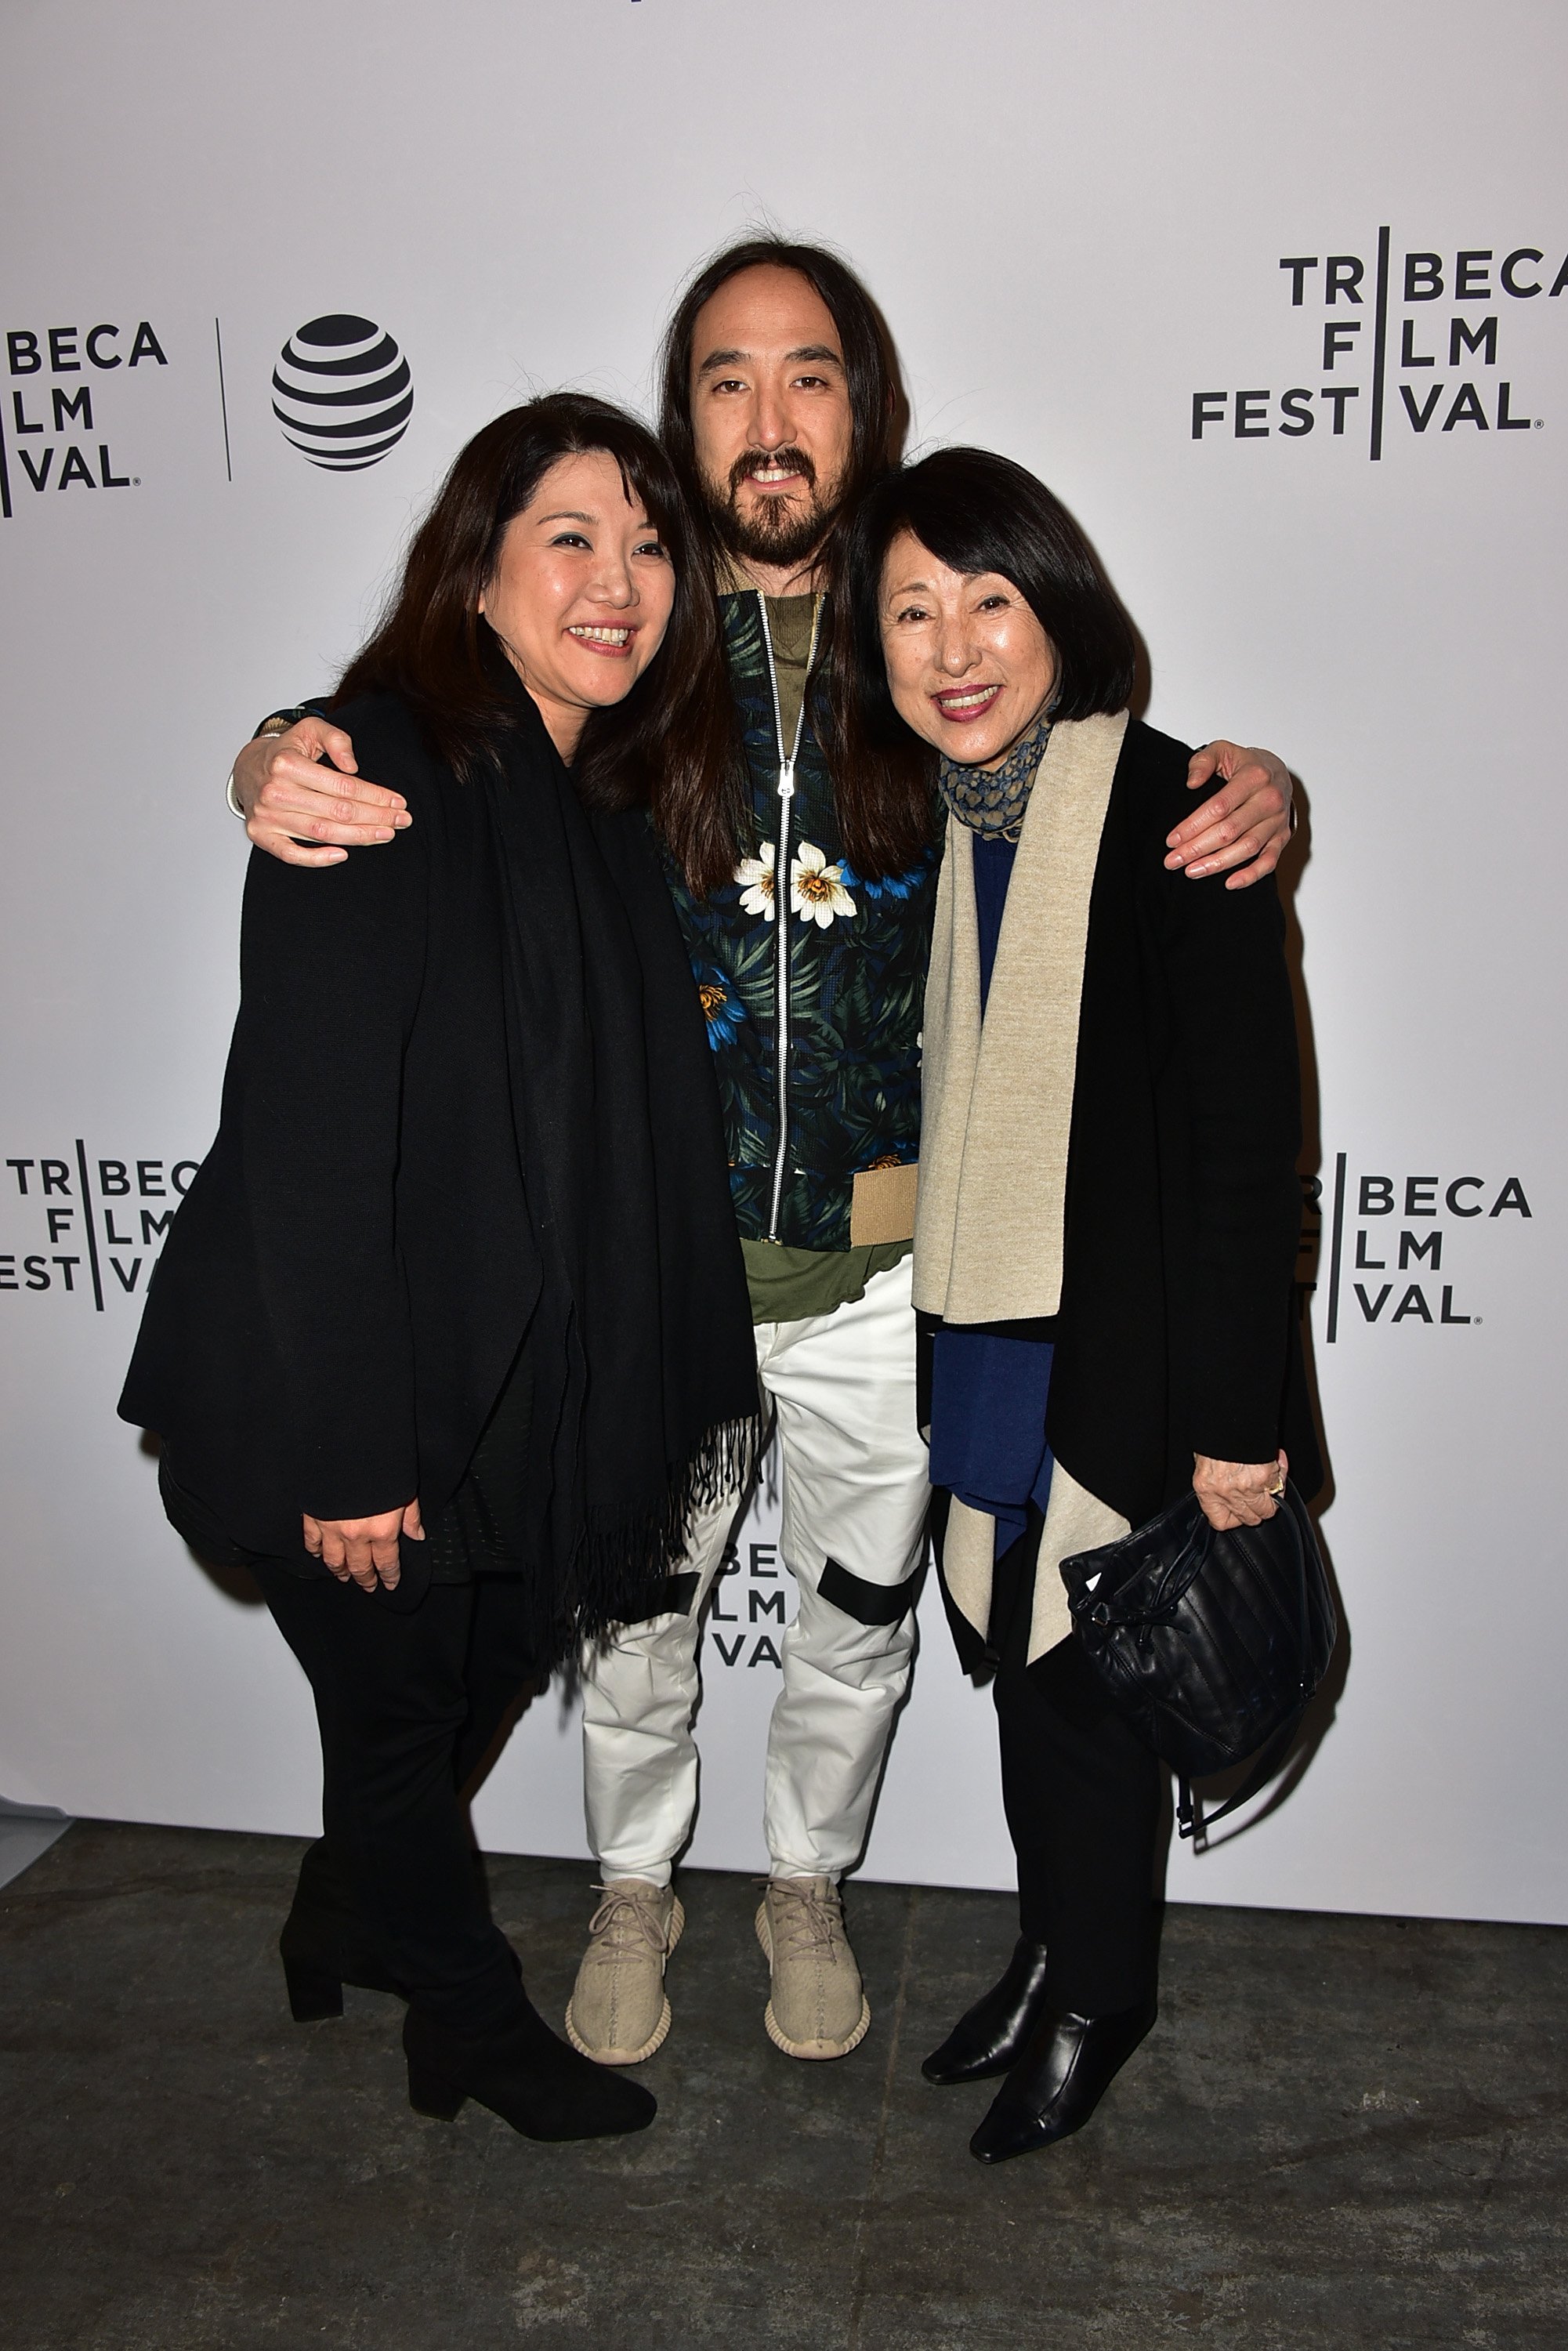 Kana Grace Nootenboom, Steve Aoki, and their mother Chizuru Kobayashi attend the 2016 Tribeca Film Festival on April 15, 2016, in New York City. | Source: Getty Images